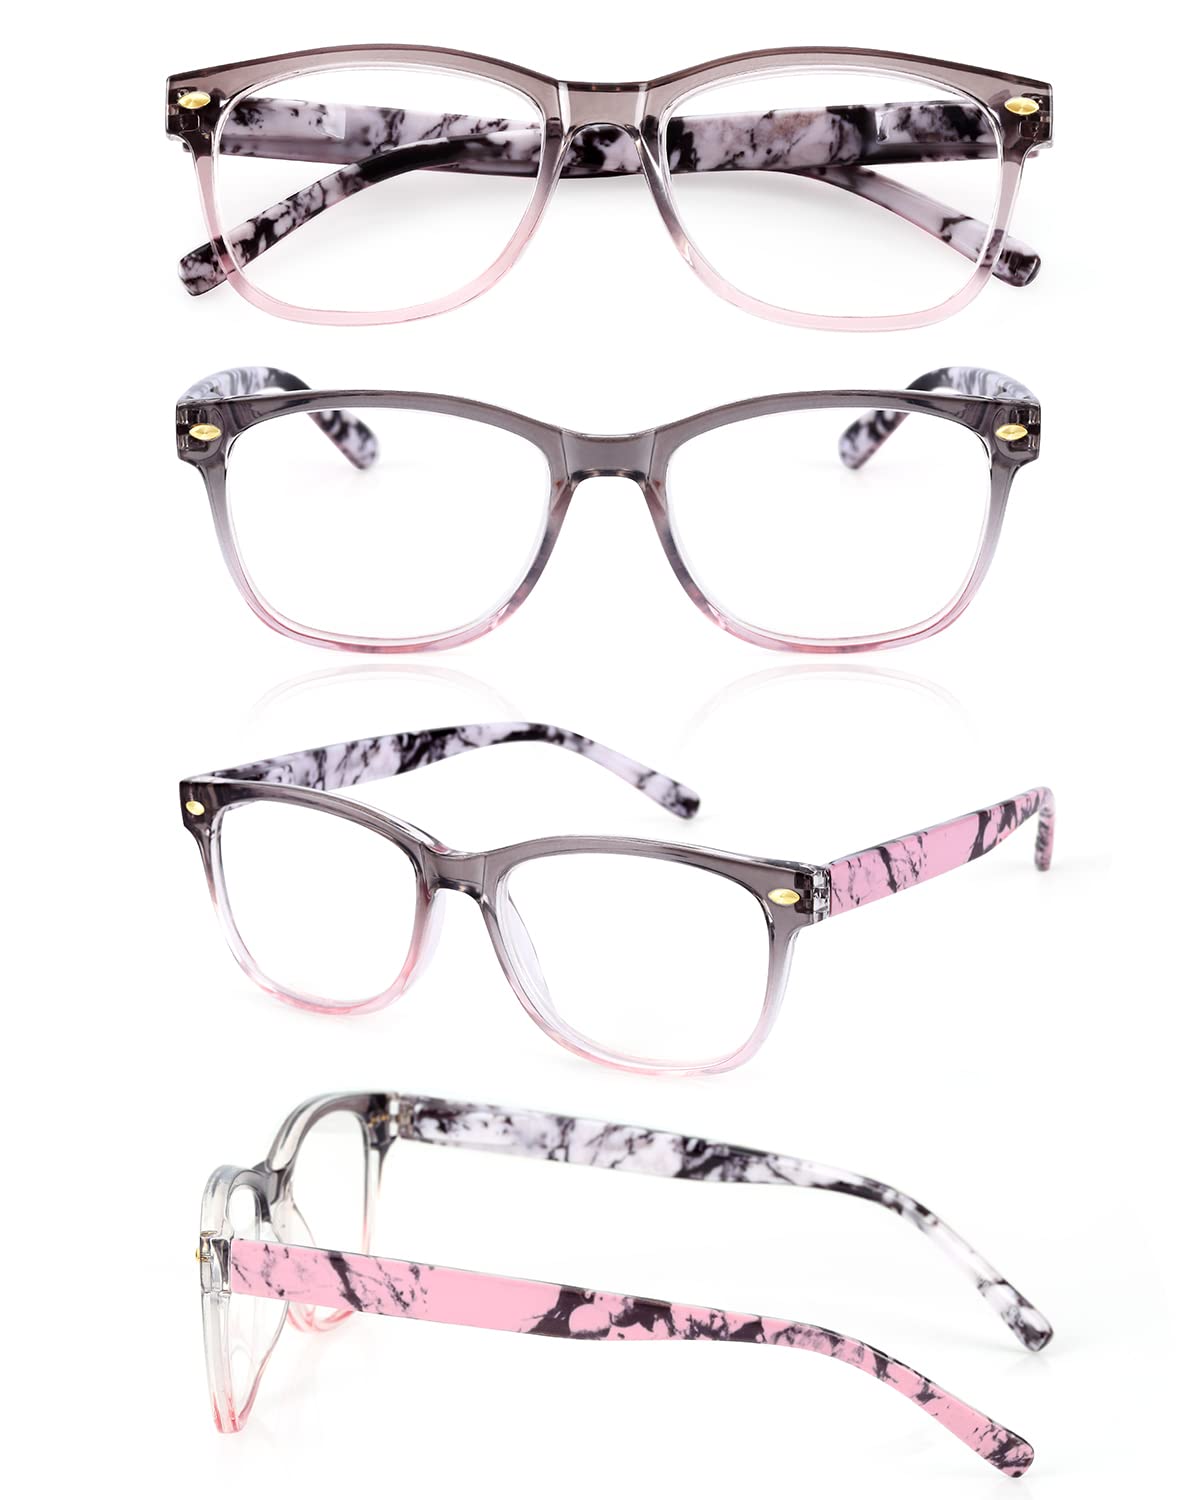 LUFF 4-Pack reading glasses for women fashion blue light blocking reading glasses with spring hinge readers printed temples